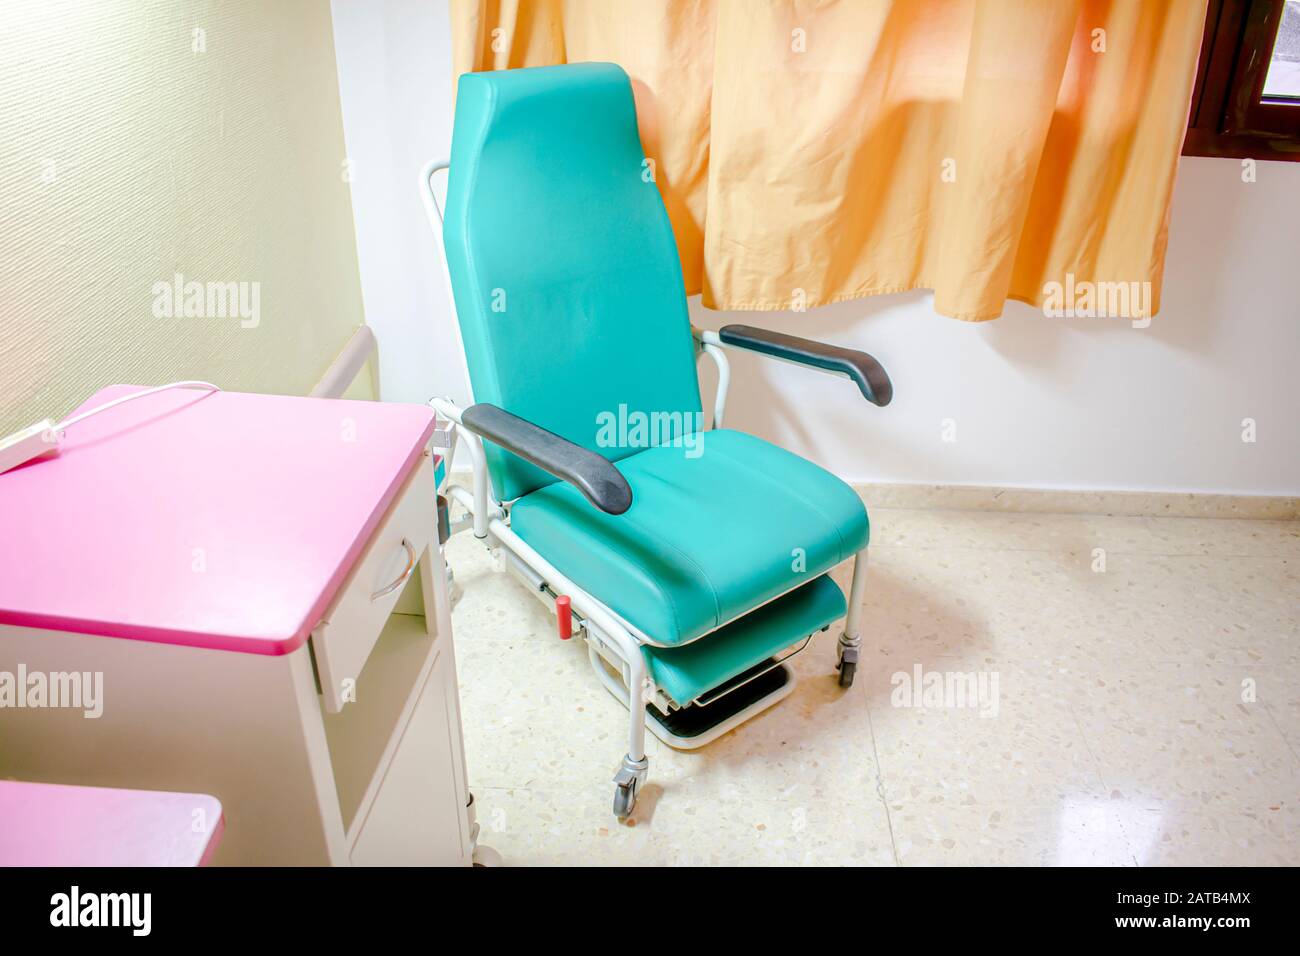 Hospital armchair convertible into a bed located in a hospital room to accompany hospitalized patients Stock Photo